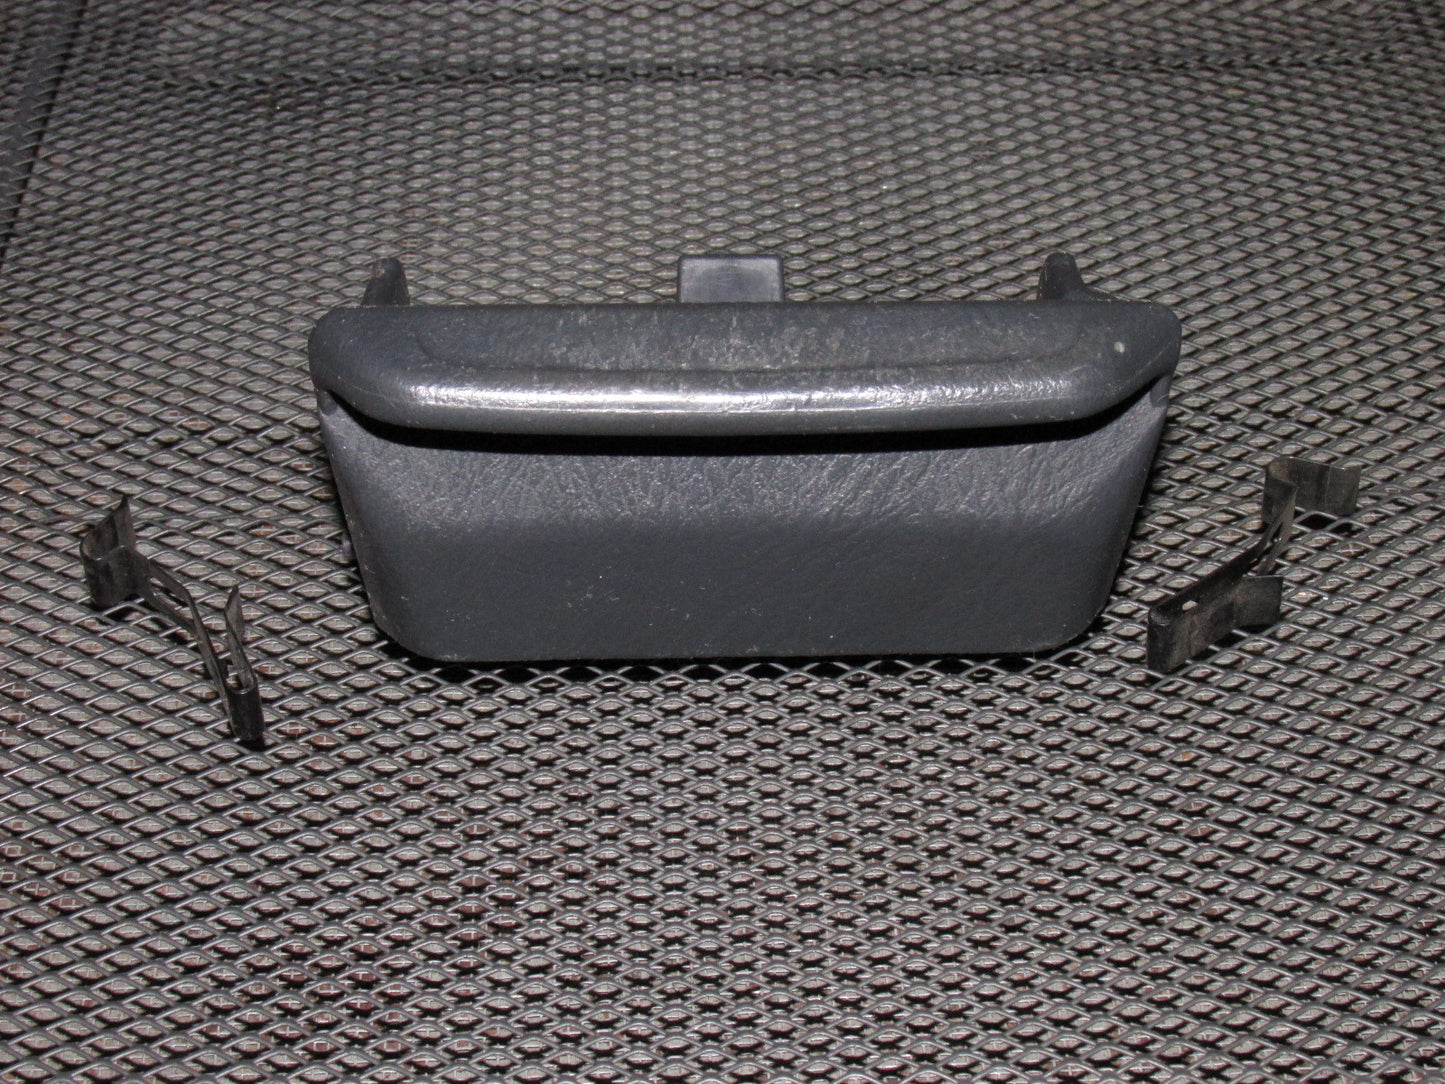 96 97 98 99 00 Honda Civic OEM Dash Coin Pouch Container